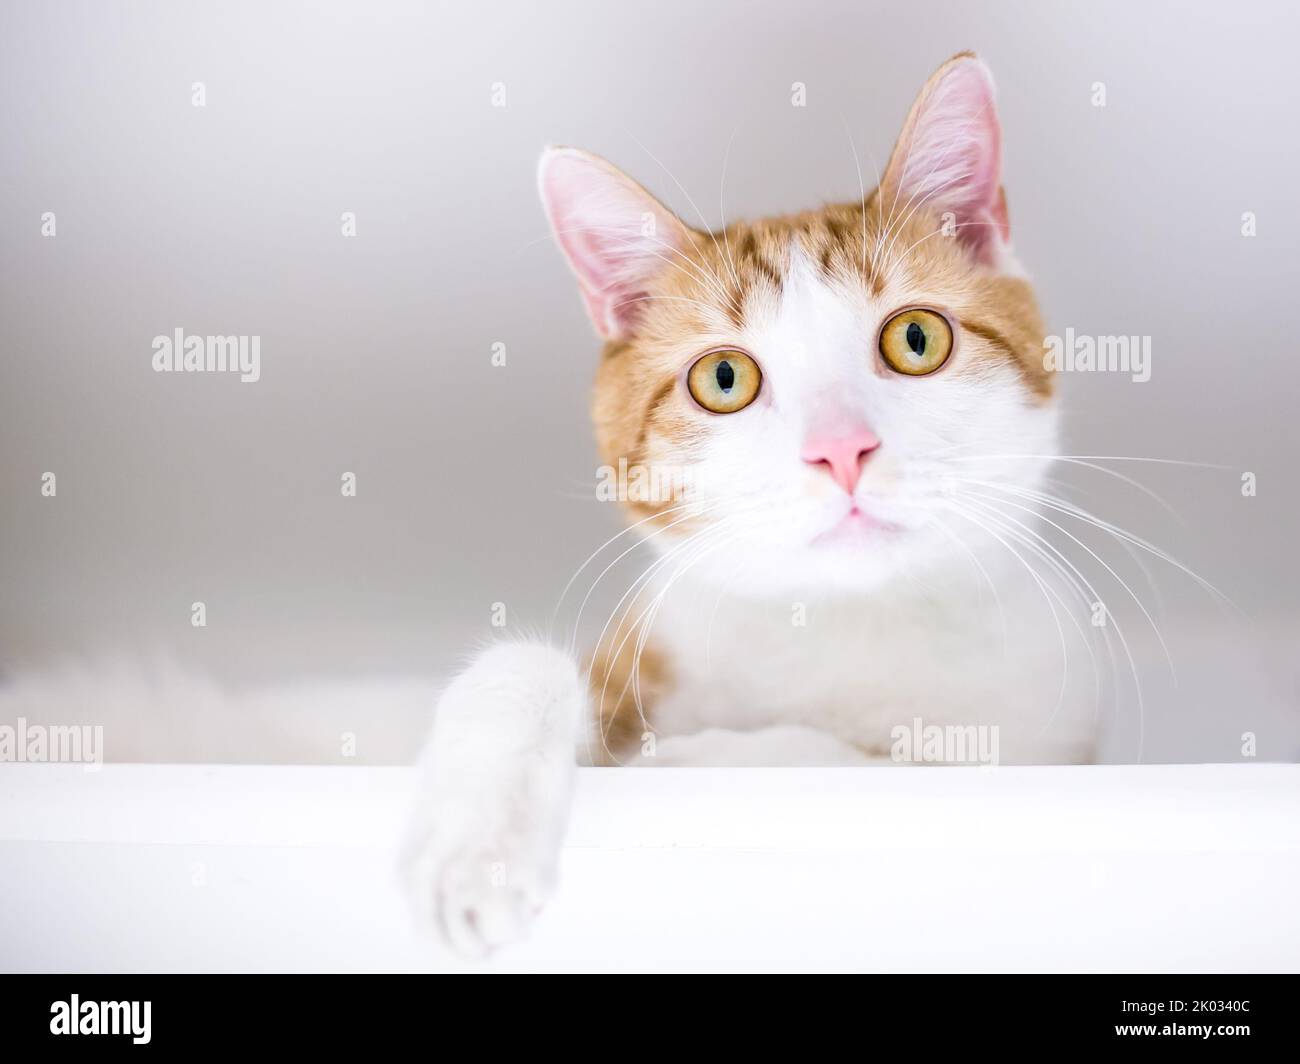 An orange tabby and white shorthair cat in a relaxed position looking down at the camera Stock Photo